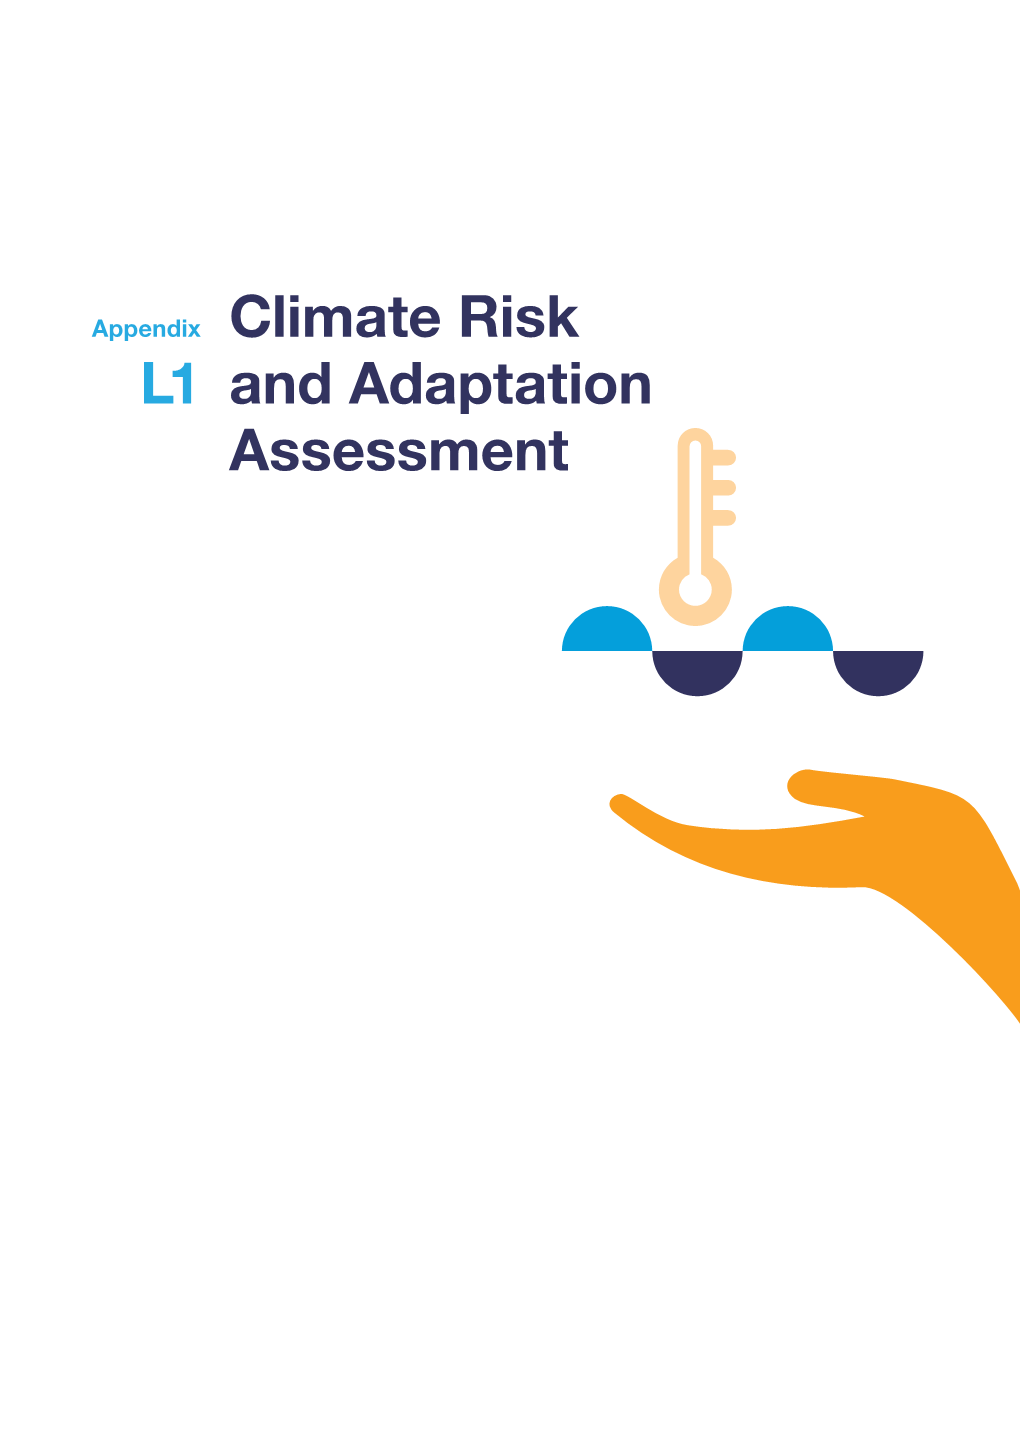 Climate Risk and Adaptation Assessment